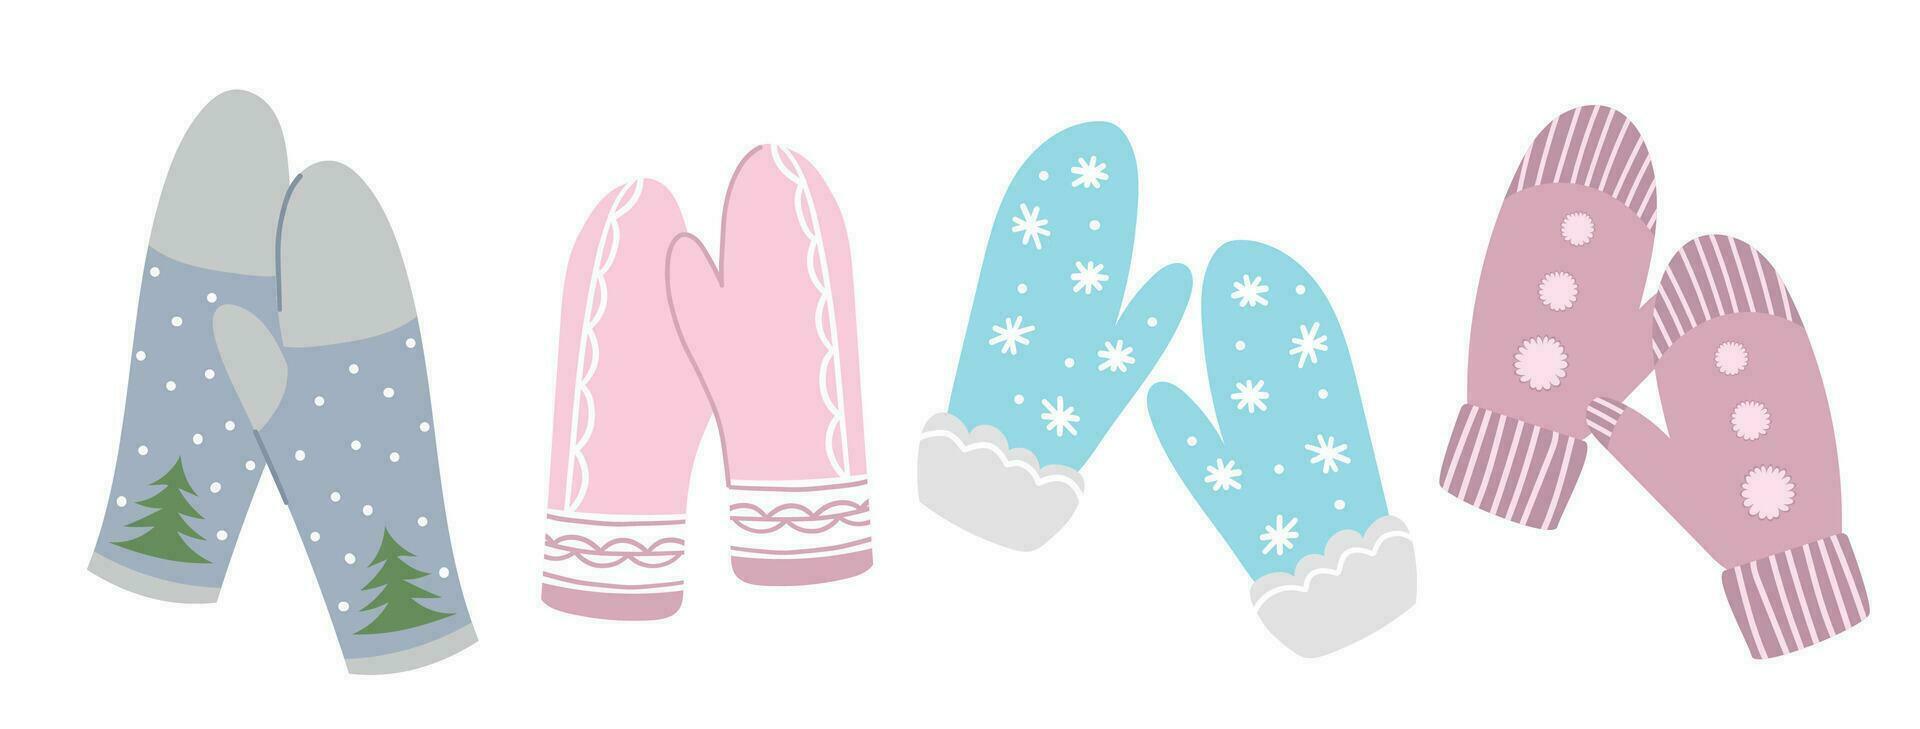 Set of different knitted mittens. Woolen or knitted mitten for cold frosty weather isolated on white background. Warm winter mittens set. Cute hand drawn elements for winter design. Winter accessories vector